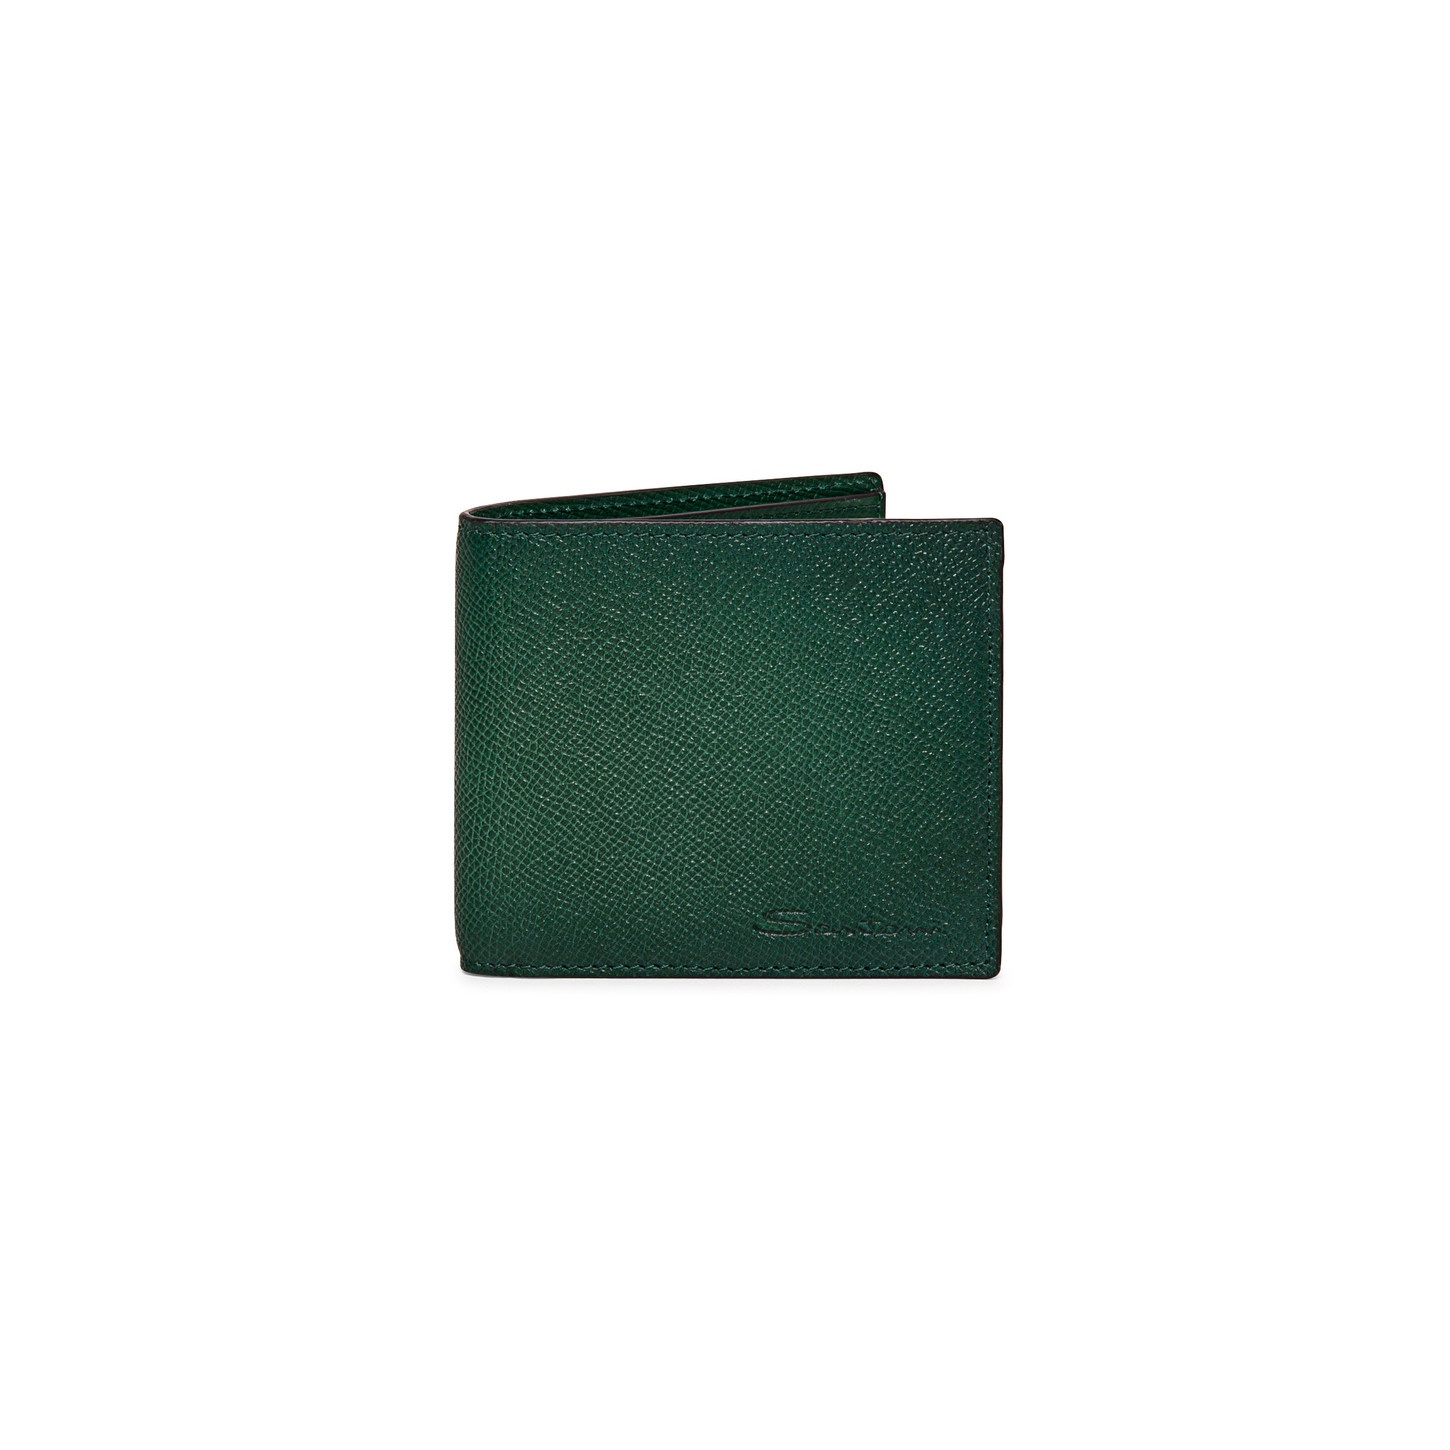 Green saffiano leather wallet - 1